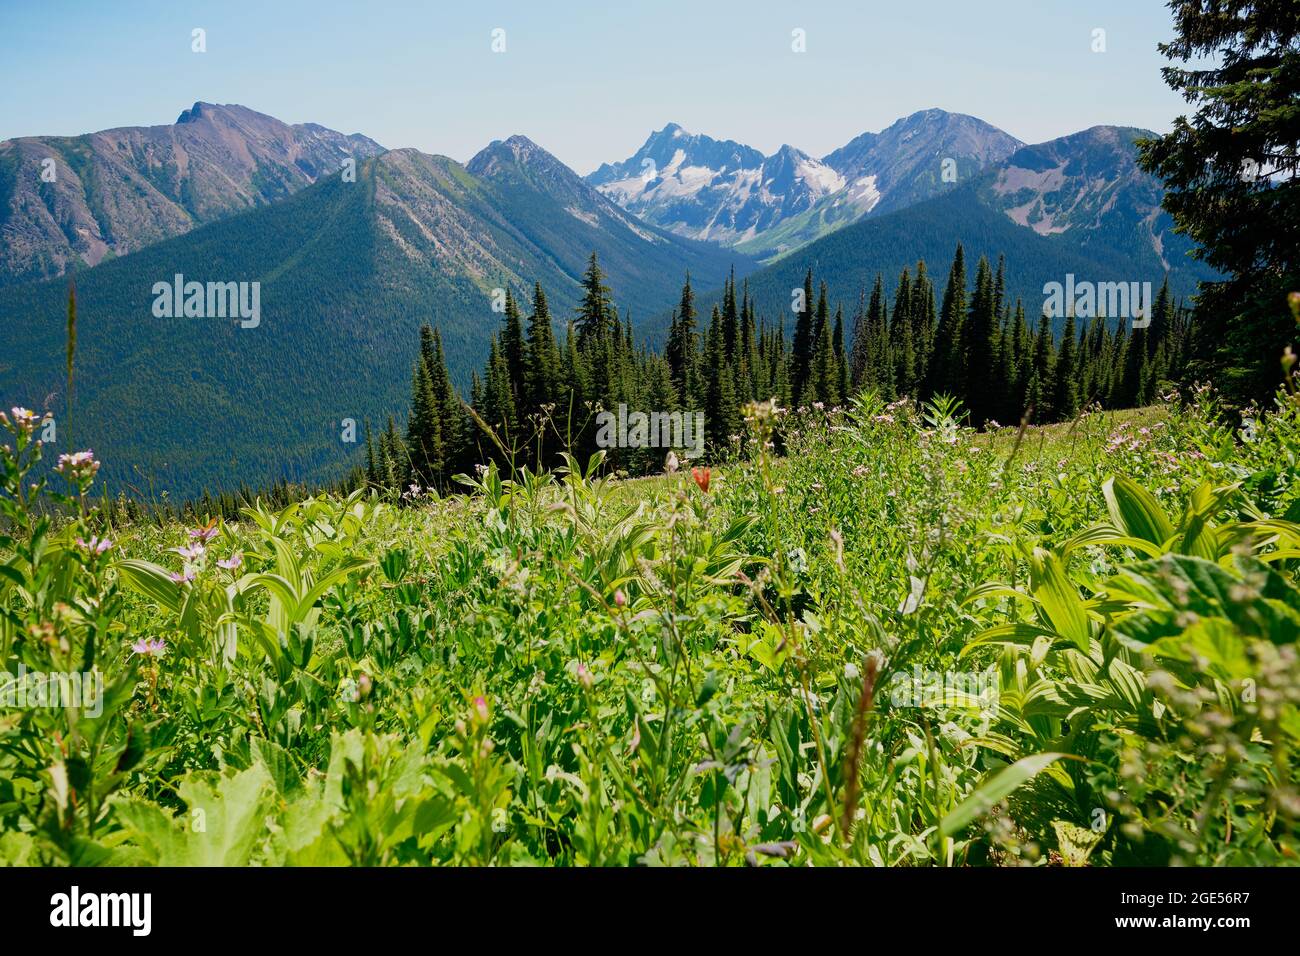 Wildflowers, alpine meadows, forest and mountain peaks:  Superlative views from Skyline Trail, Manning Park, BC, Canada Stock Photo